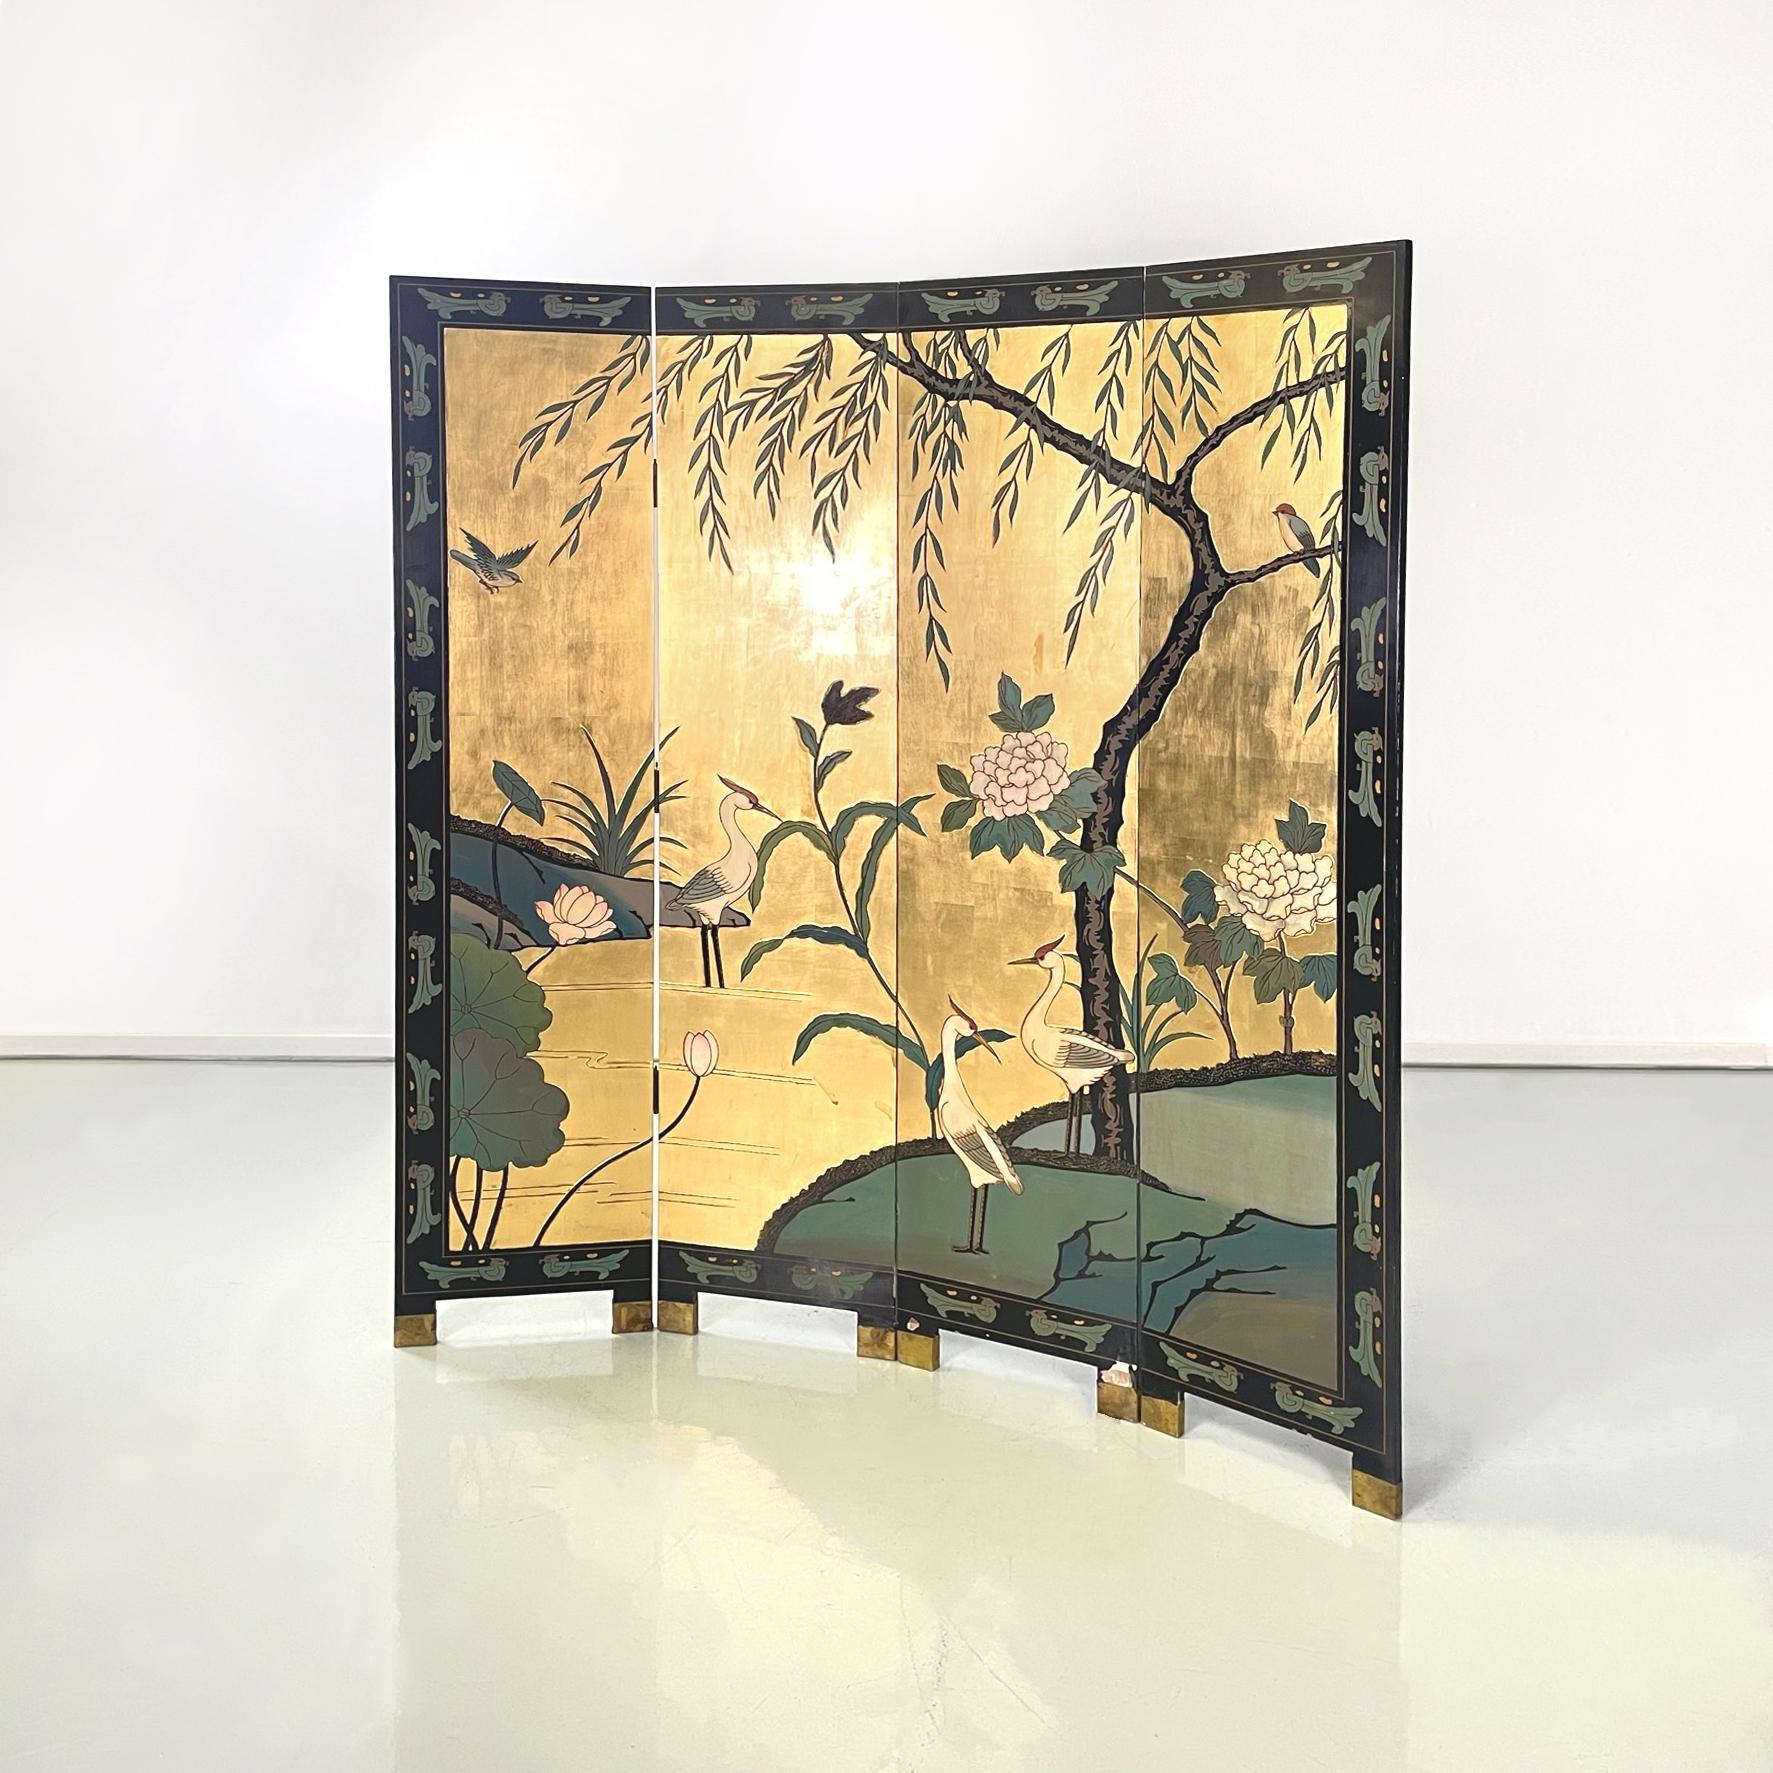 Chinese antique Decorated 4-door wooden screen with gold leaf, 1900-1950s
4-door wooden screen, decorated with designs on both sides. The front side features a design with herons immersed in a natural landscape, adorned with gold leaf. The back side